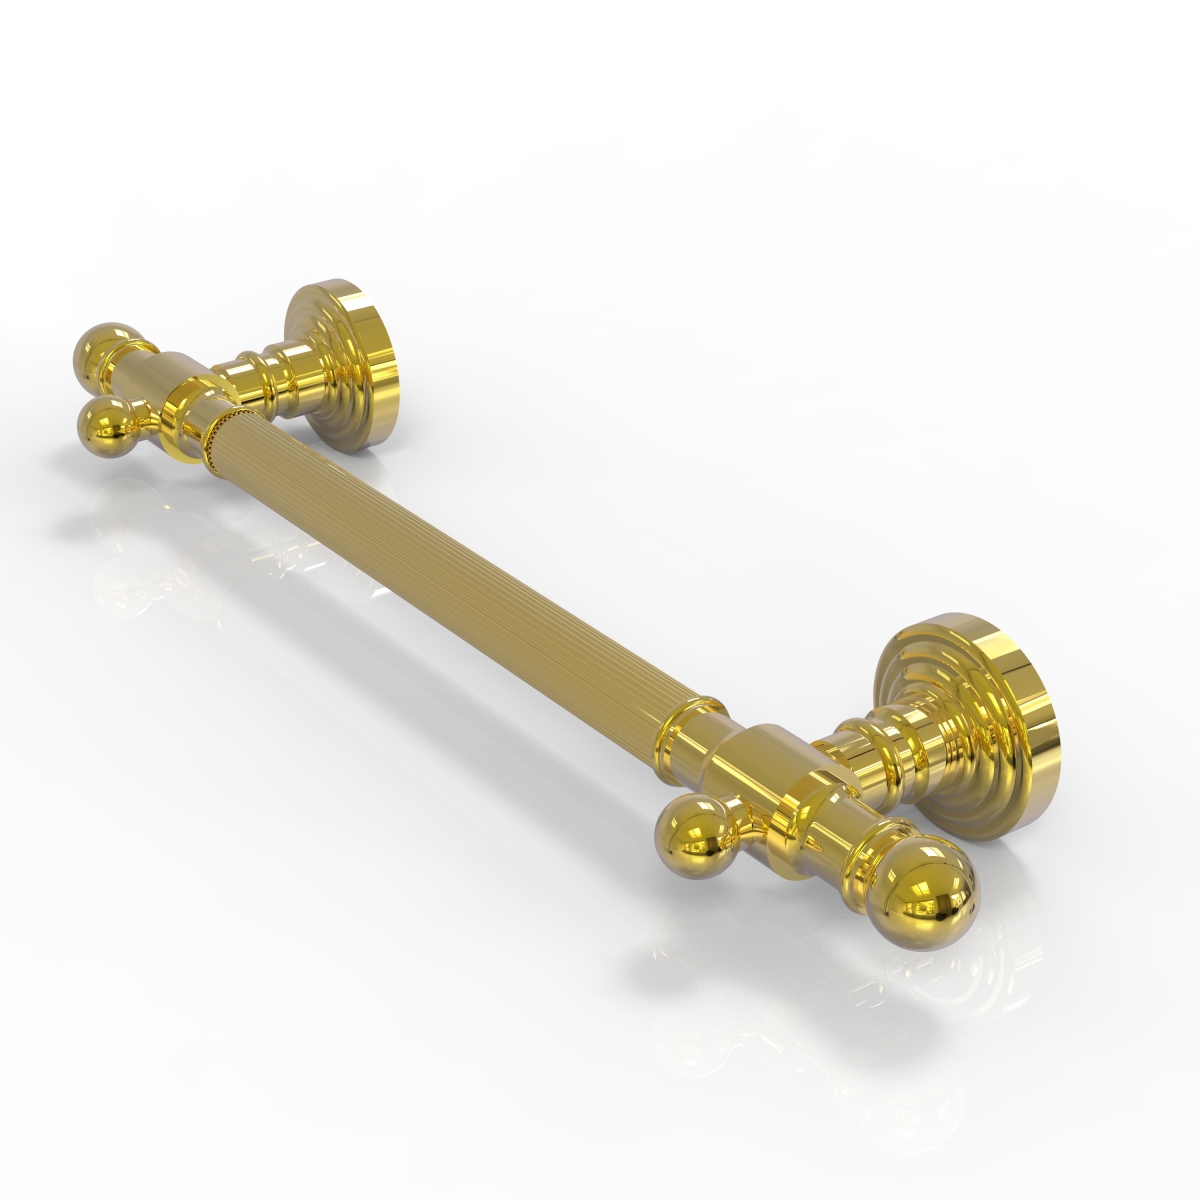 Picture of Allied Brass WP-GRR-24-PB 24 in. Reeded Grab Bar, Polished Brass - 3.5 x 30 x 24 in.